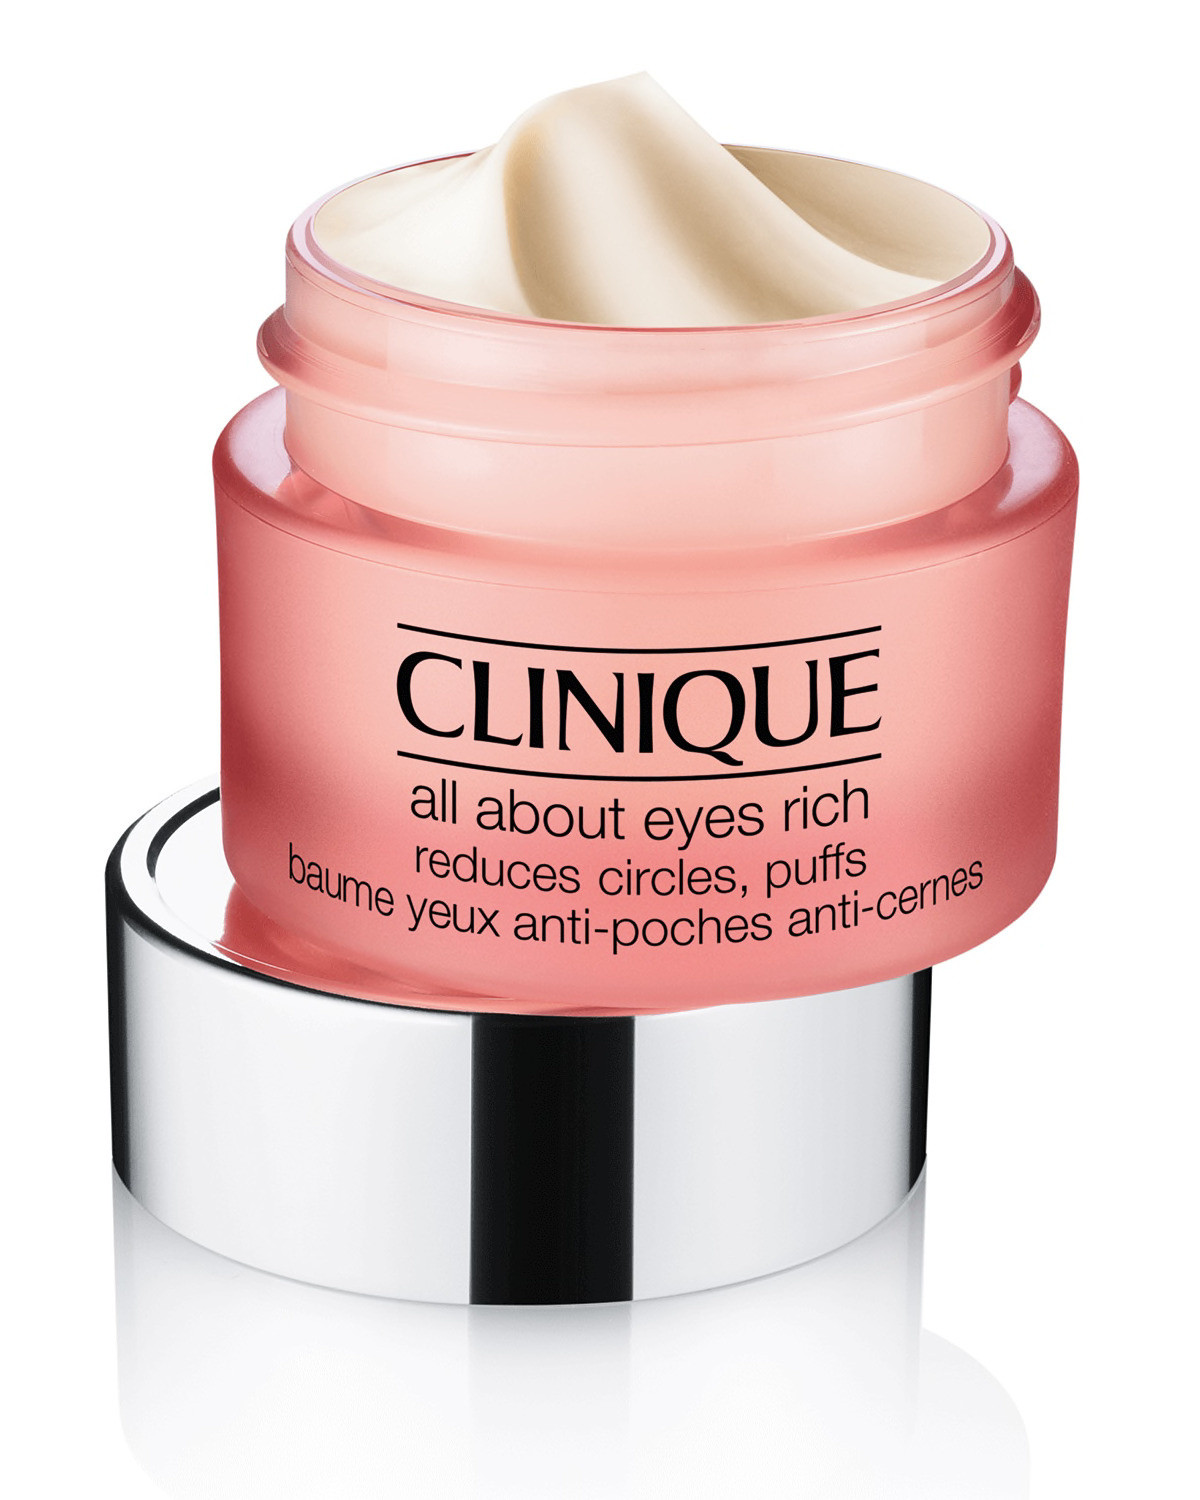 Clinique all about eyes rich balm 15 ml, Verde, large image number 0